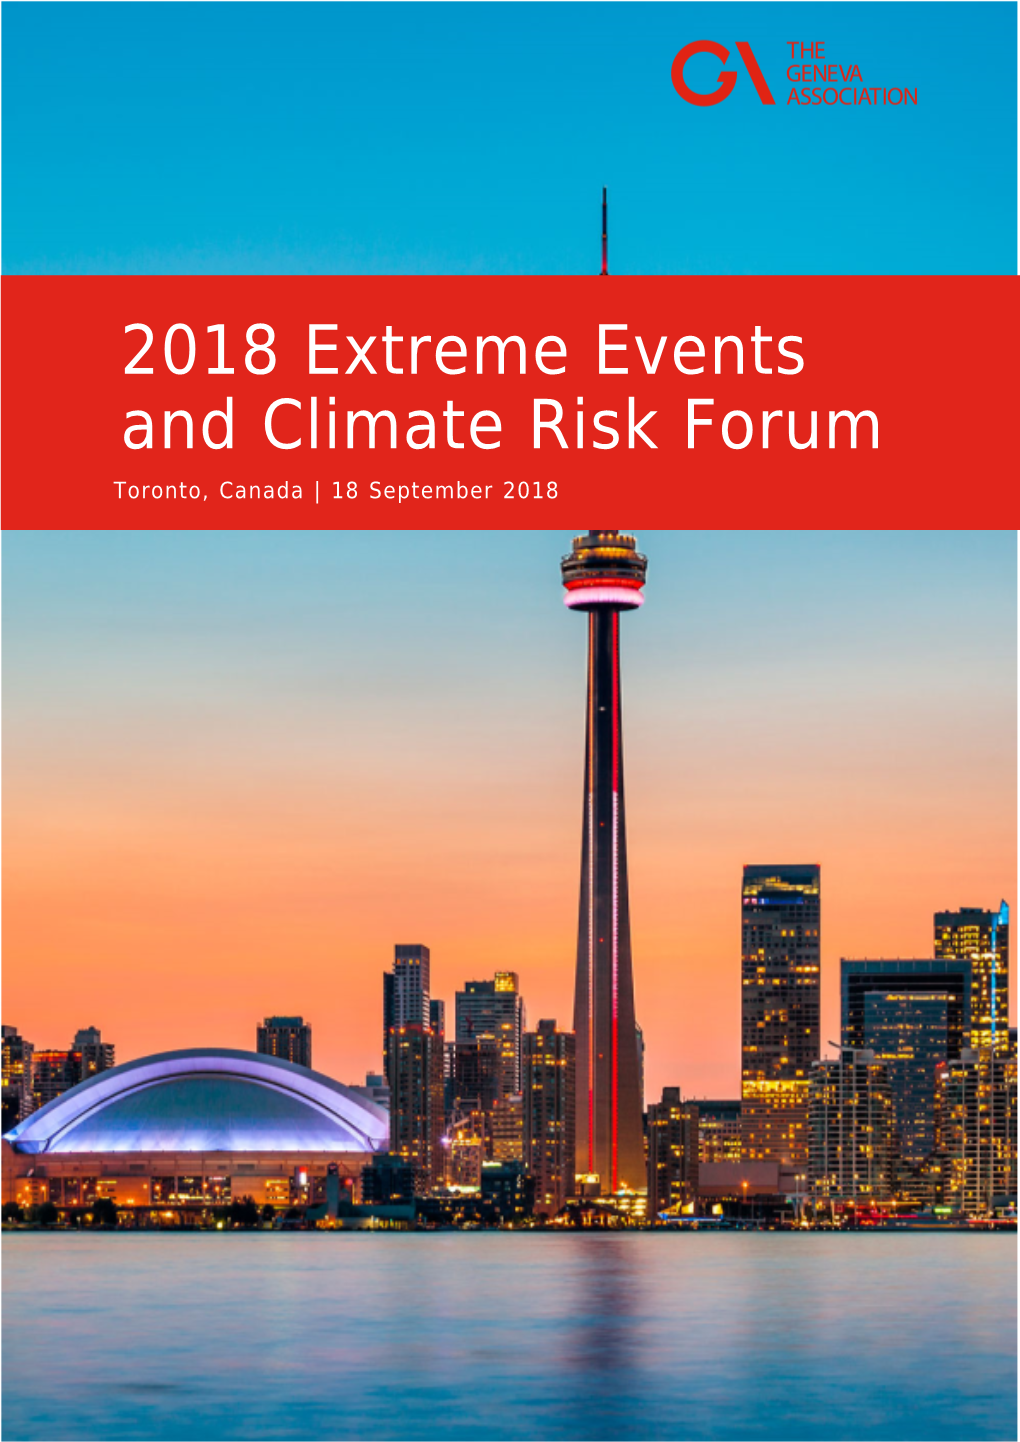 2018 Extreme Events and Climate Risk Forum Toronto, Canada | 18 September 2018